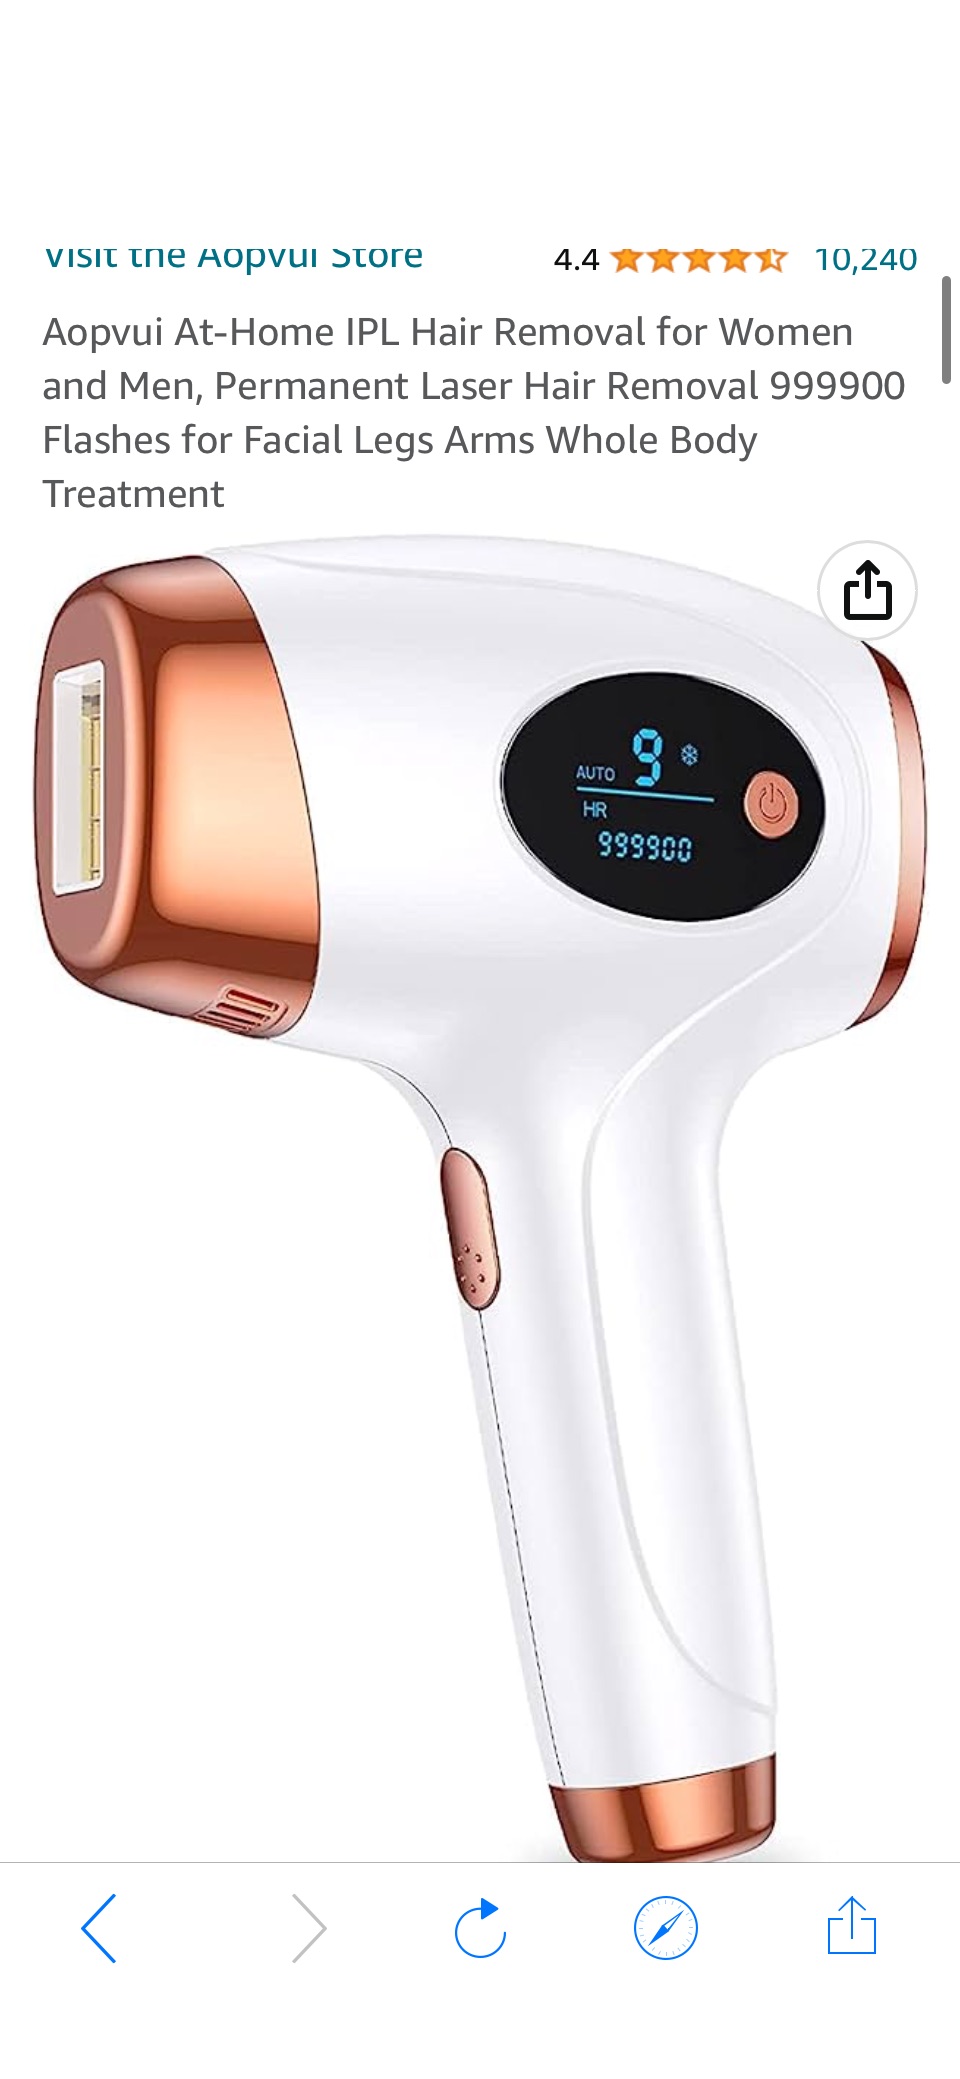 Amazon.com: Aopvui At-Home IPL Hair Removal for Women and Men, Permanent Laser Hair Removal 999900 Flashes for Facial Legs原价189.99